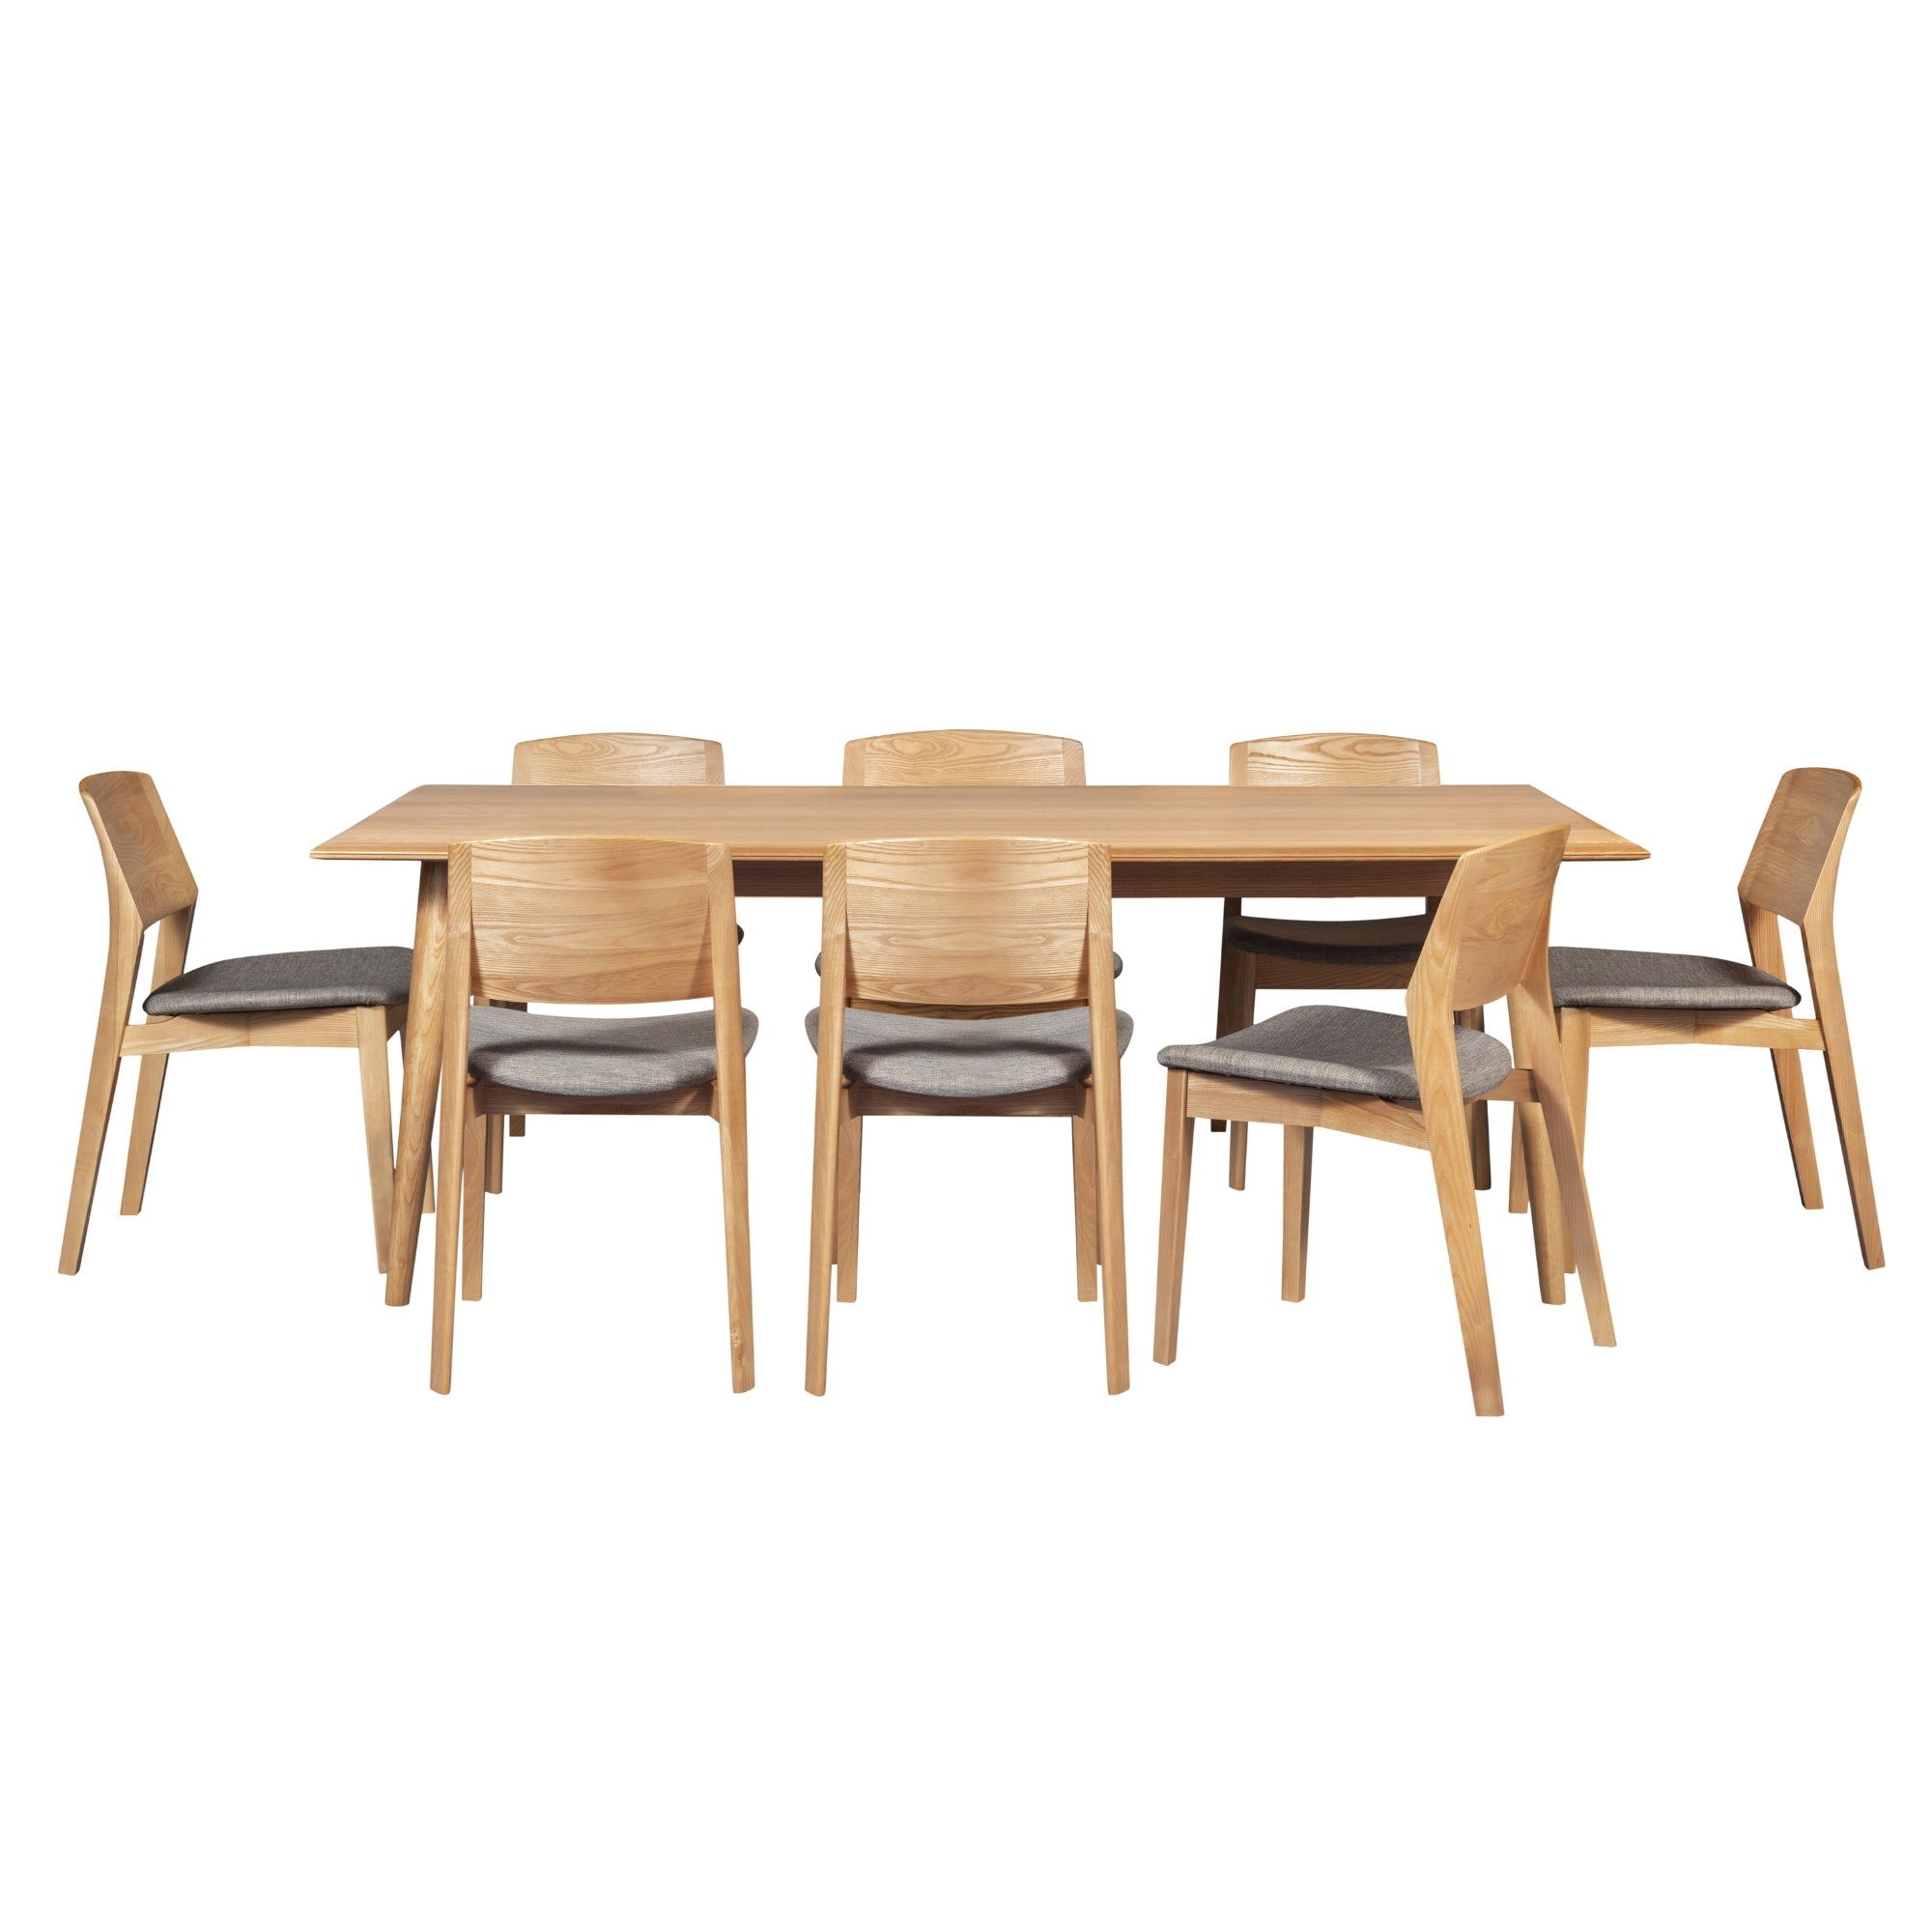 8-Seater Dining Table Set, Solid Ash Wood, Fabric Chairs, Oak